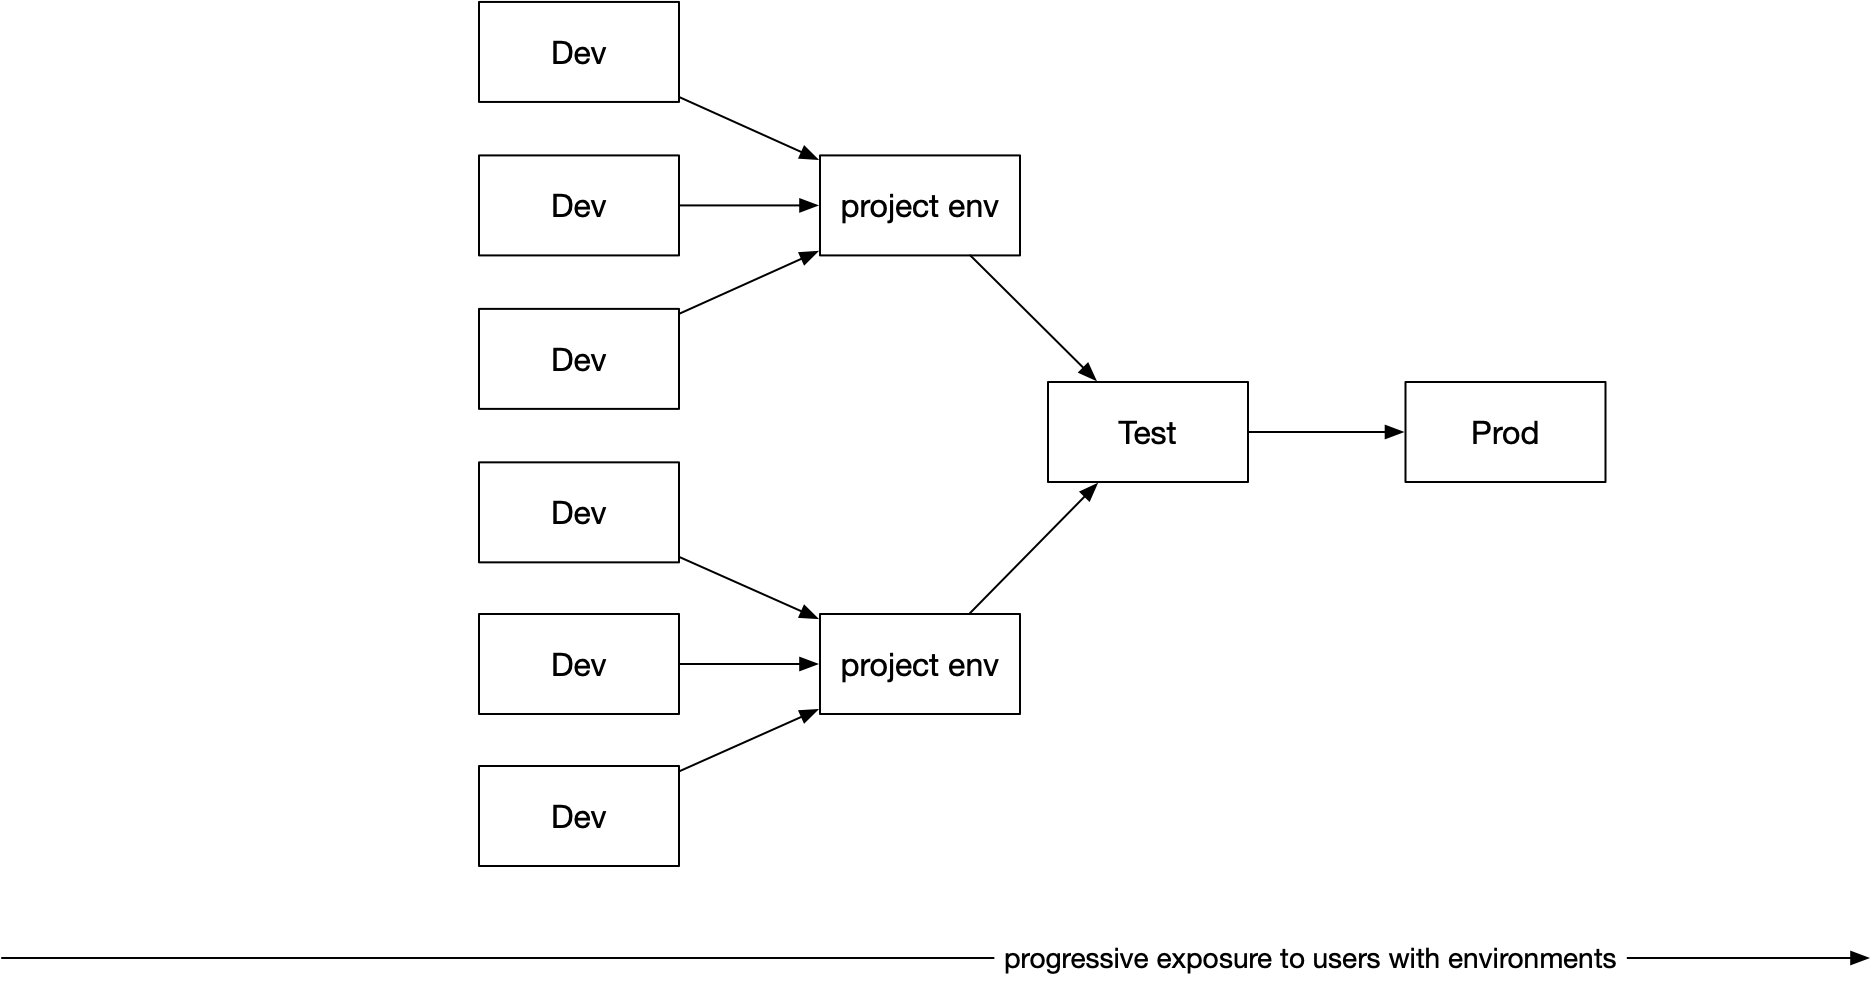 Diagram of software deployments with project environments